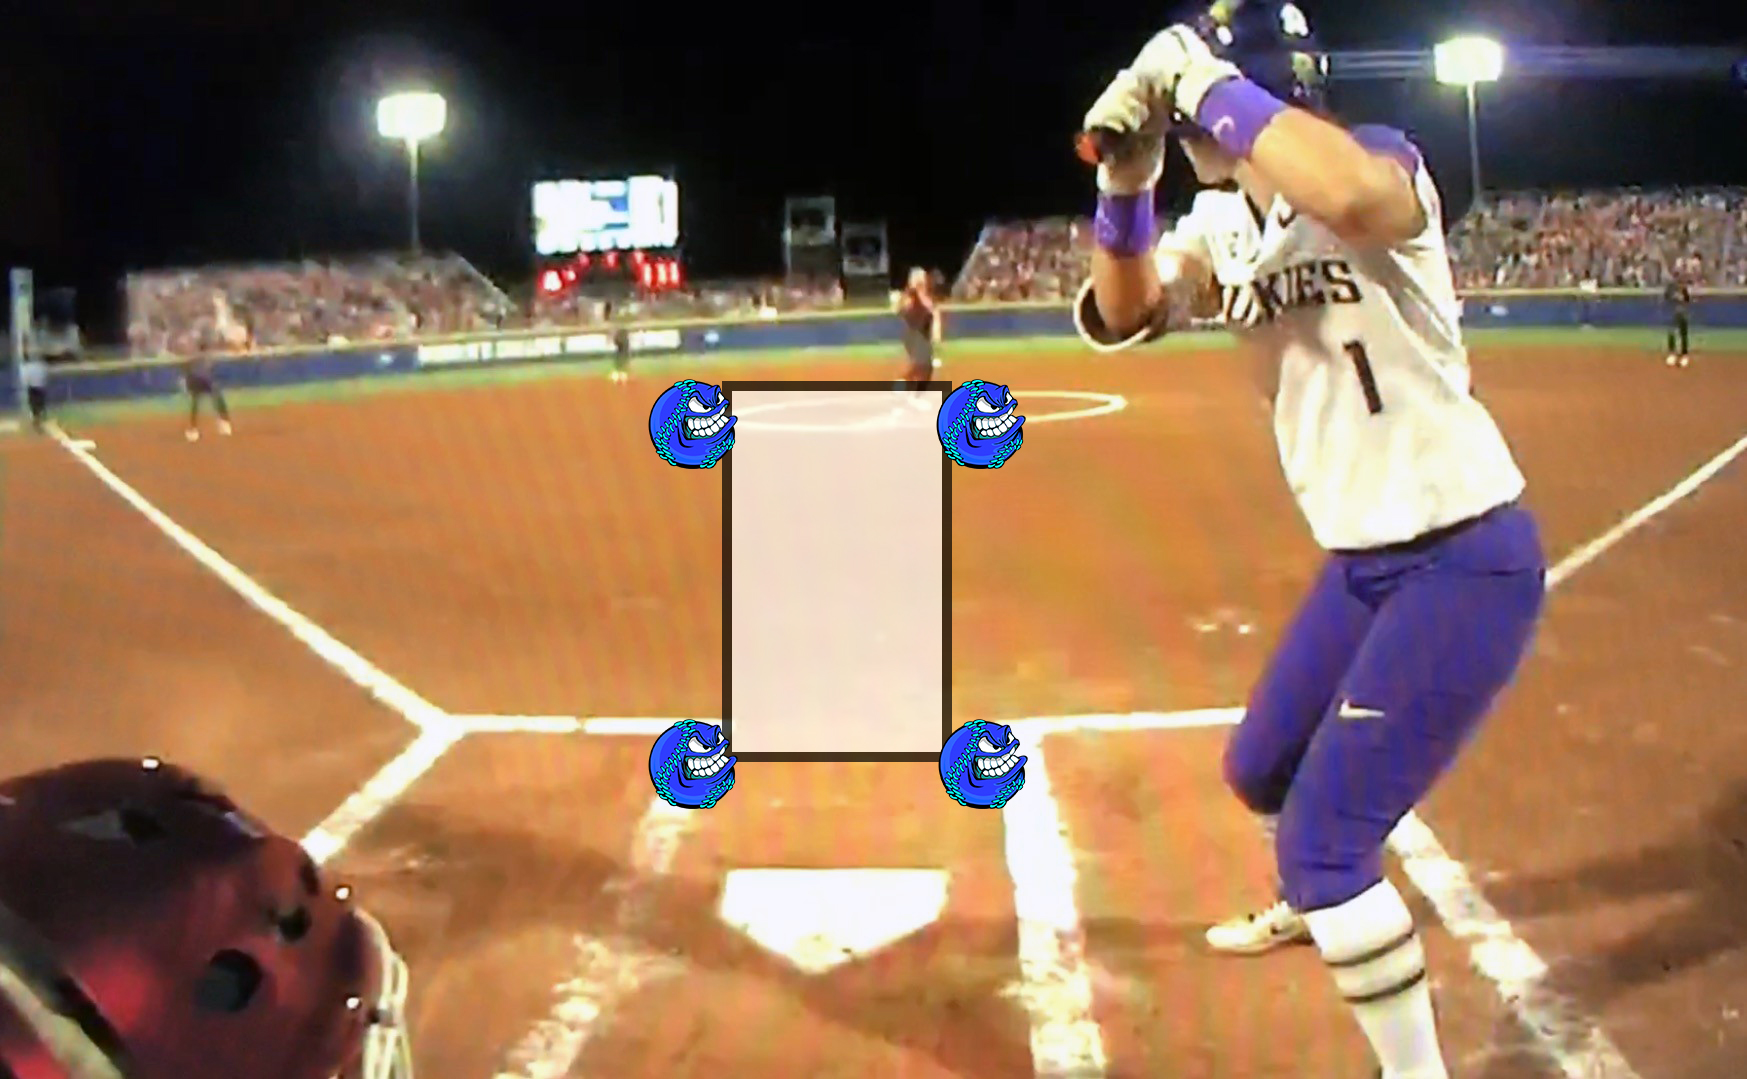 The umpire's strike zone, the only zone that matters - Fastpitcher ...